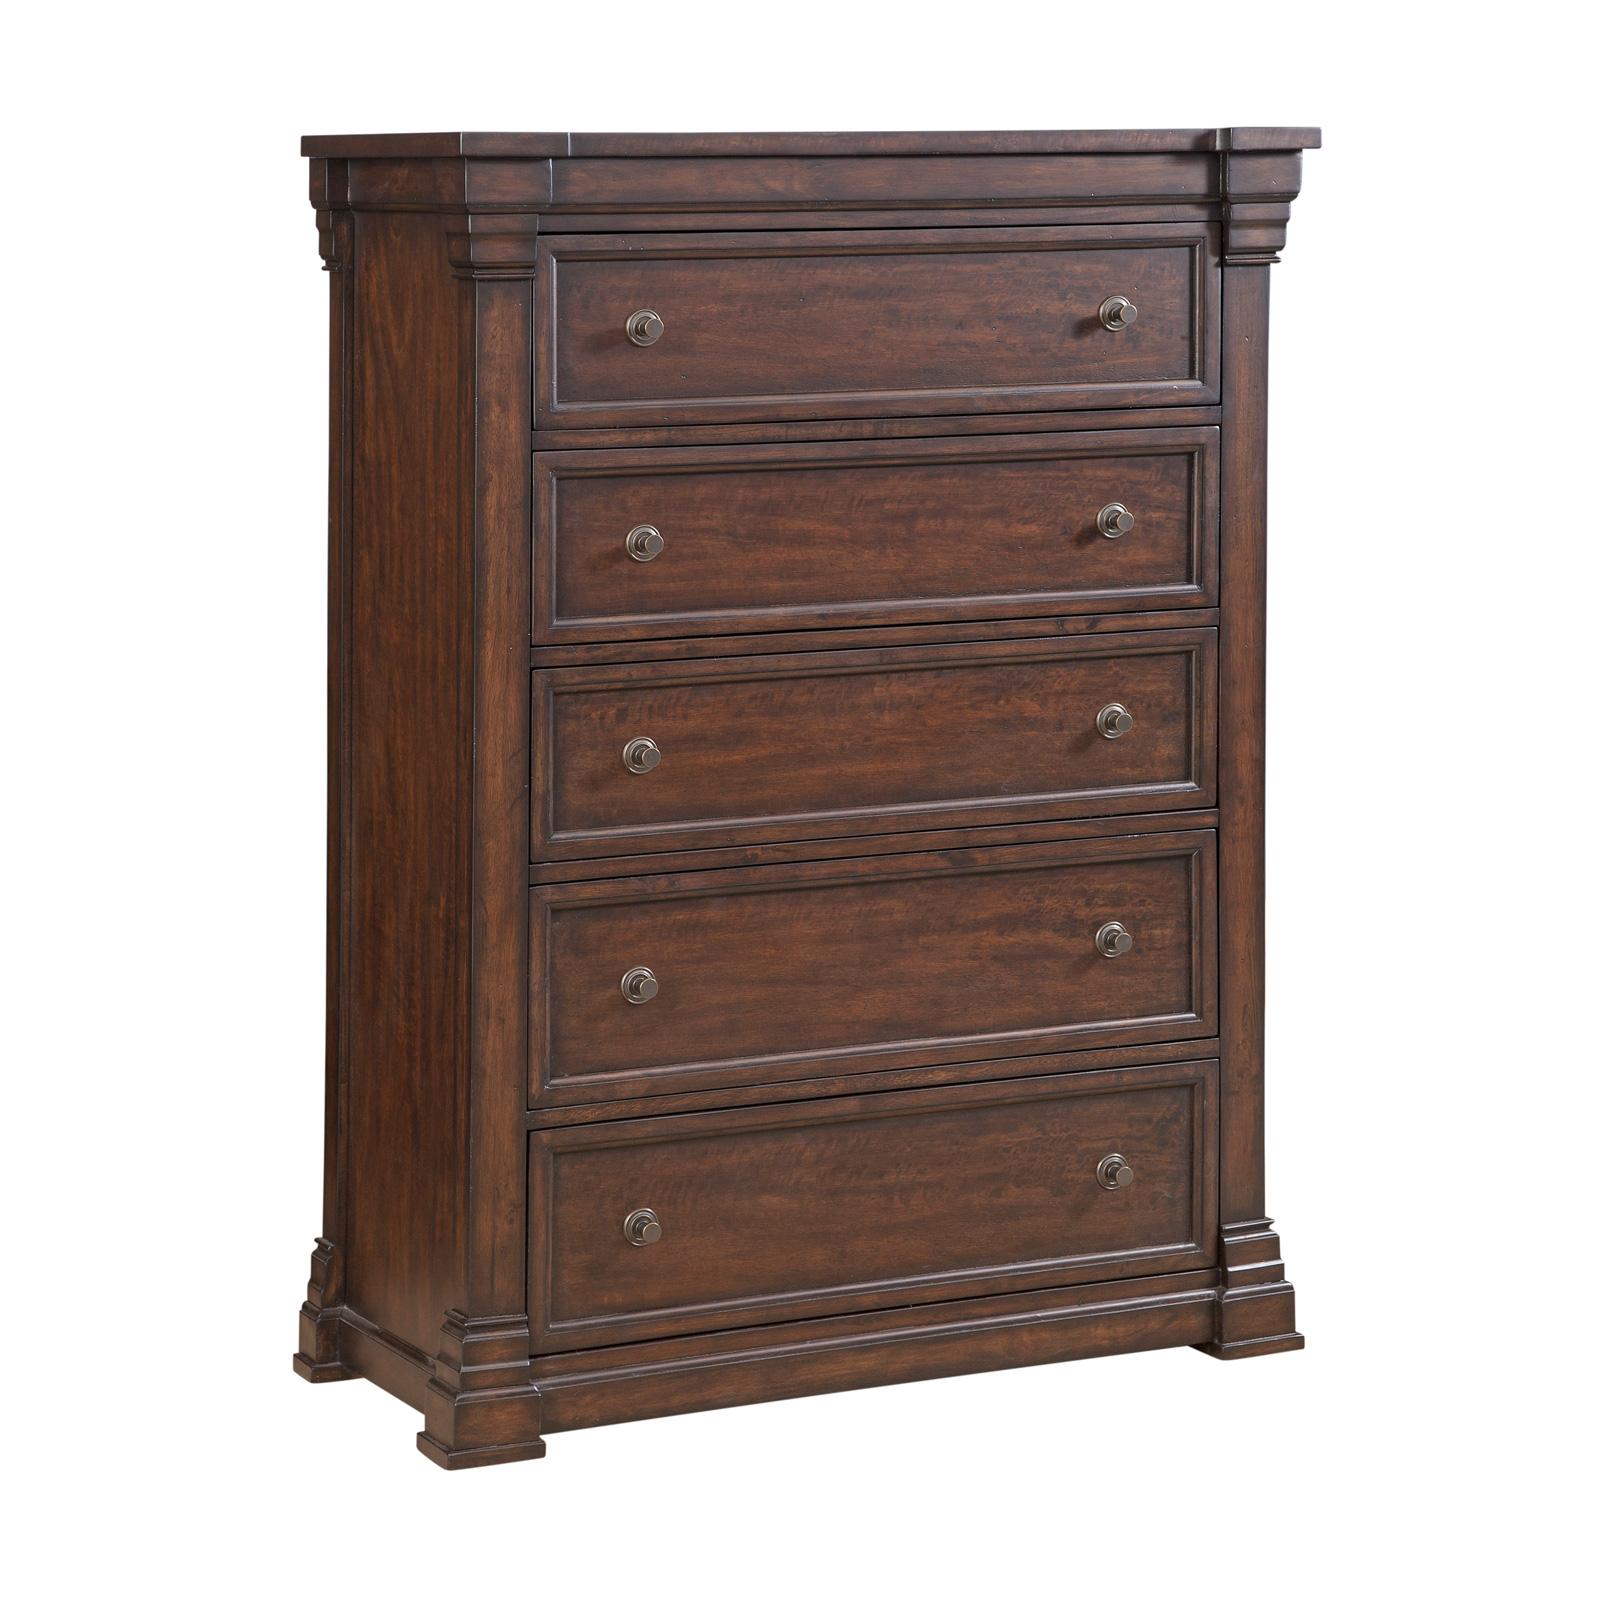 Transitional, Traditional Chest Kestrel Hills 4800-150 4800-150 in Tobacco, Mahogany 